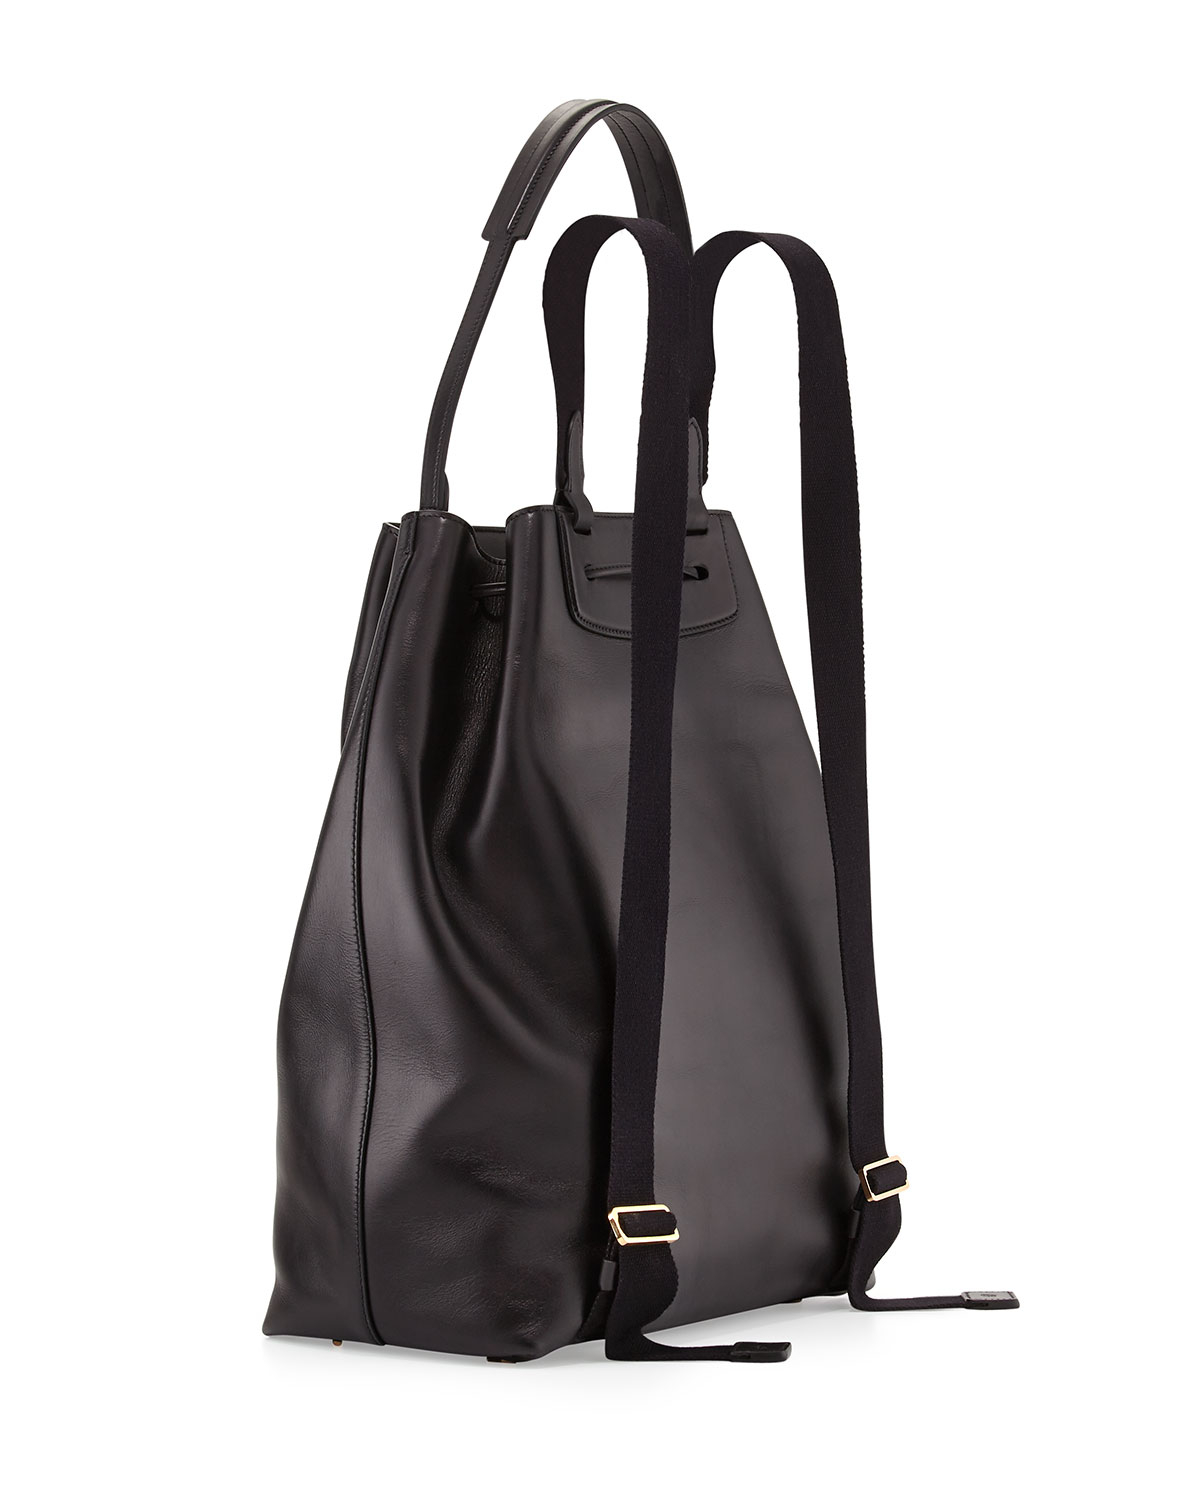 Lyst - The Row Mini Leather Drawstring Backpack in Black